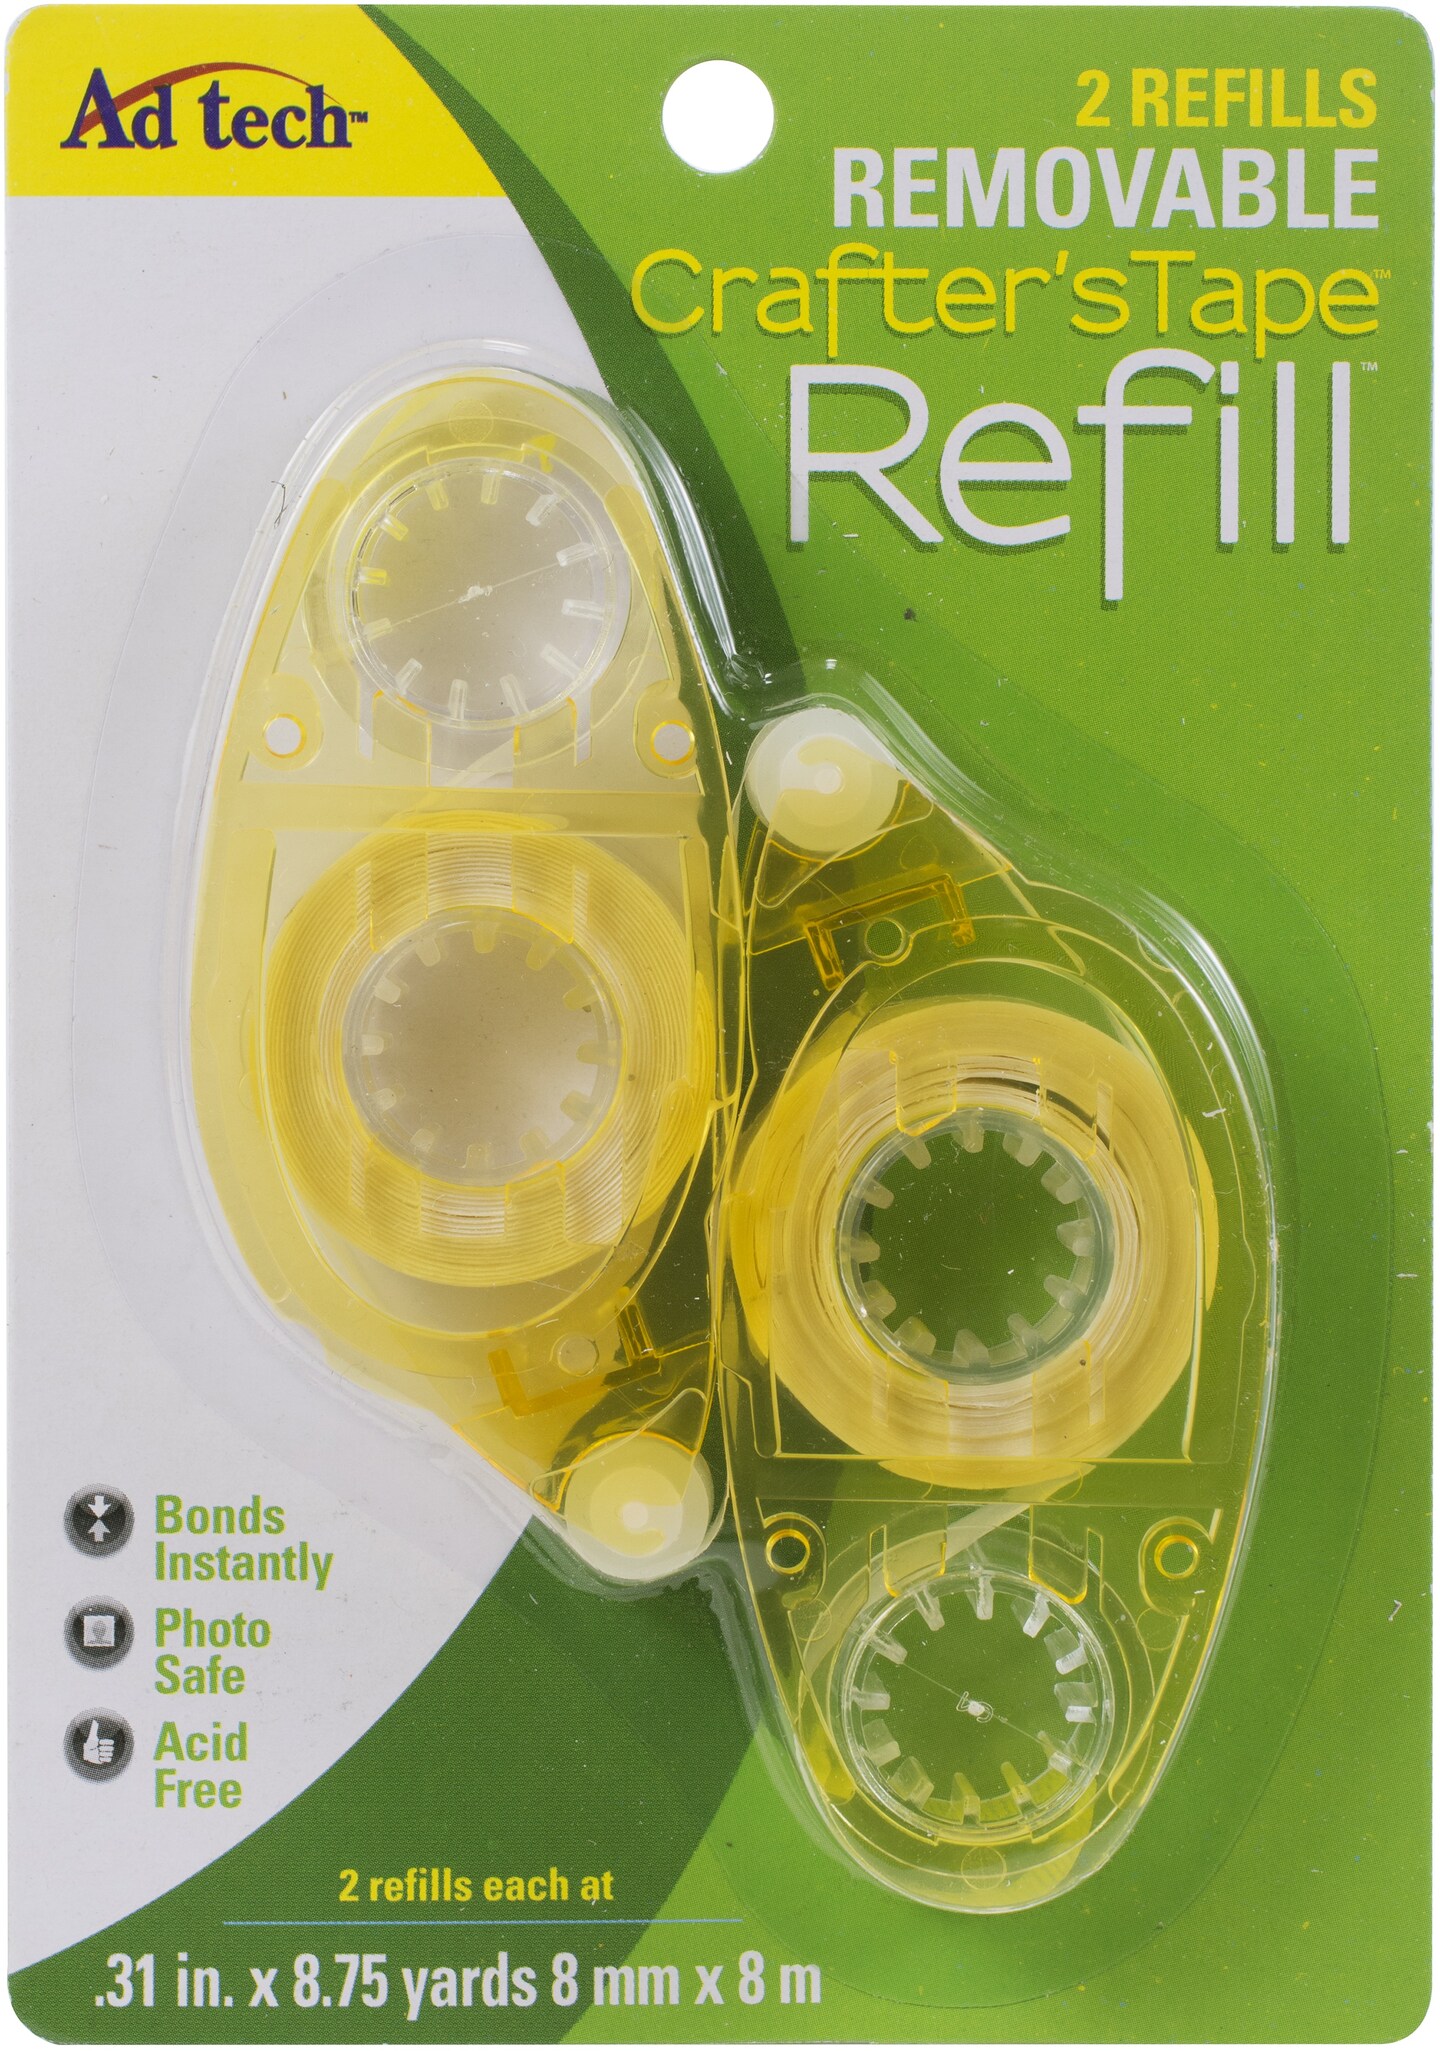 AD TECH CRAFTER'S TAPE REFILLING 